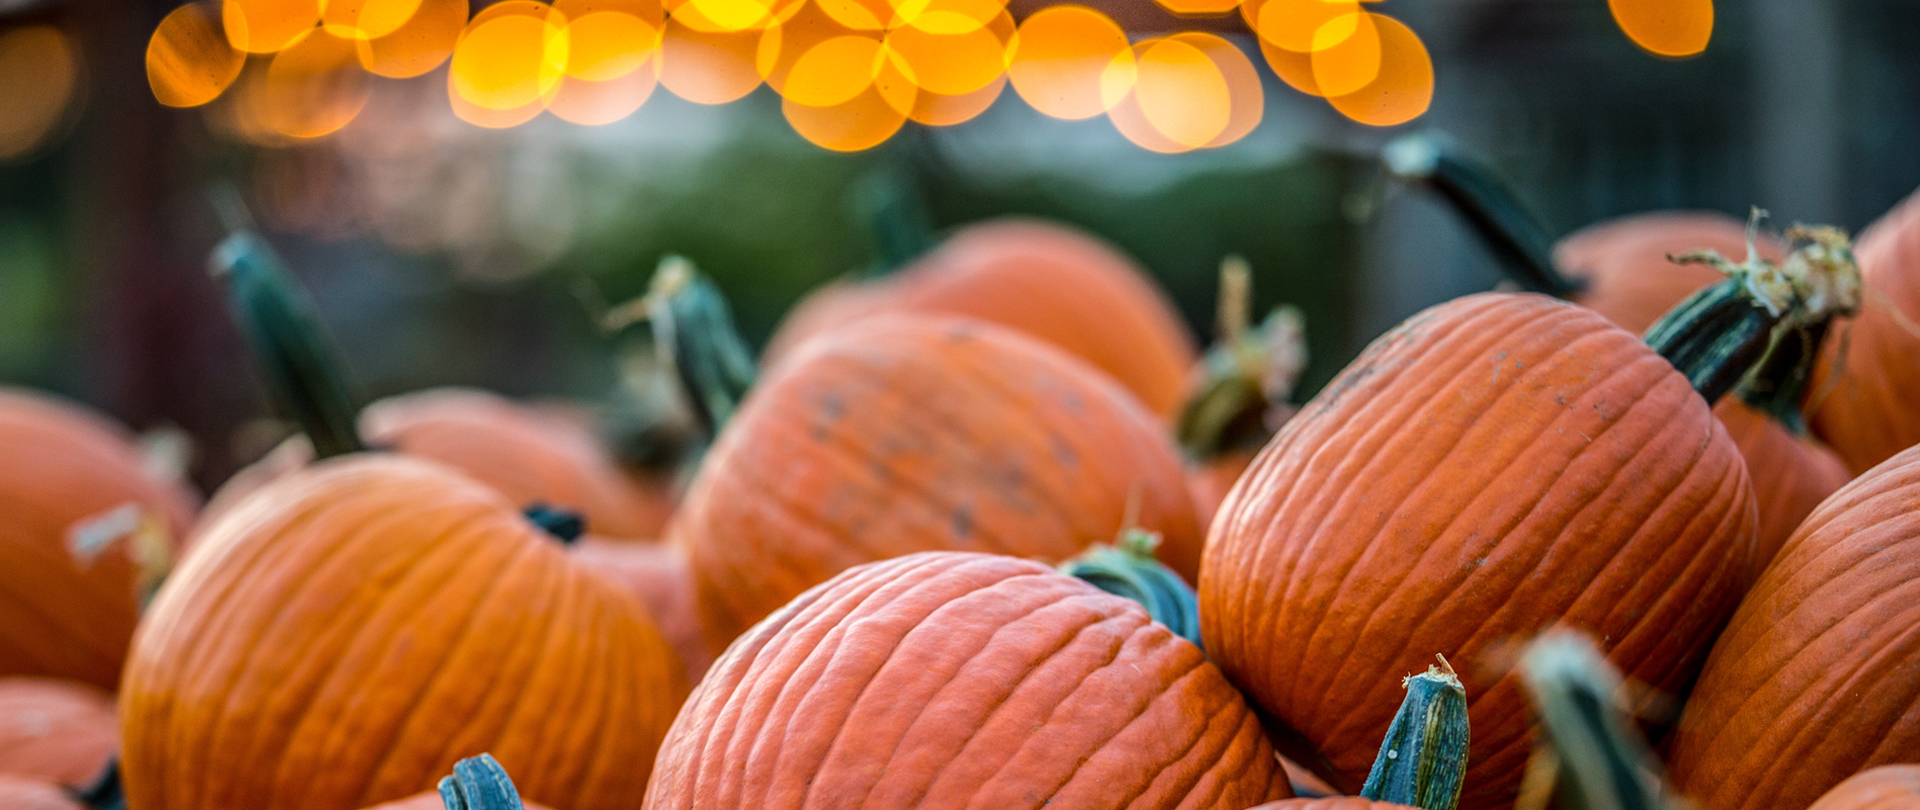 Sunday Night Fellowship
Student Ministry
Pumpkin Decorating, October 23
Check-in at CLC 1400
